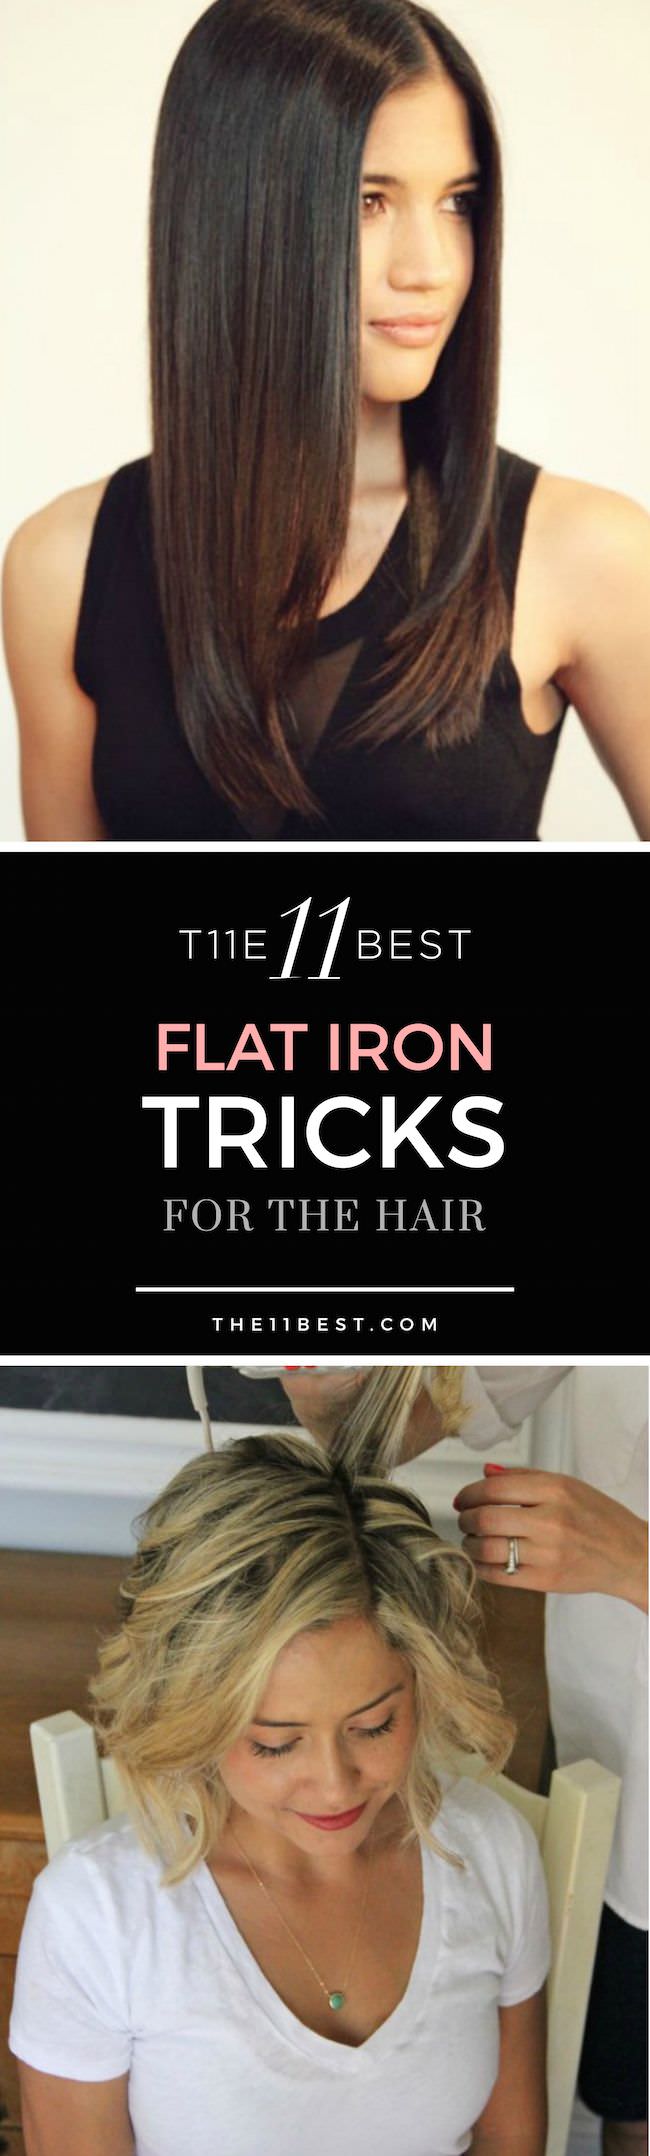 Flat irons are not just to achieve sleek straight hair, you'll be surprised to know that you can do trendiest tricks to your hair using them. Check out these flat iron tricks!